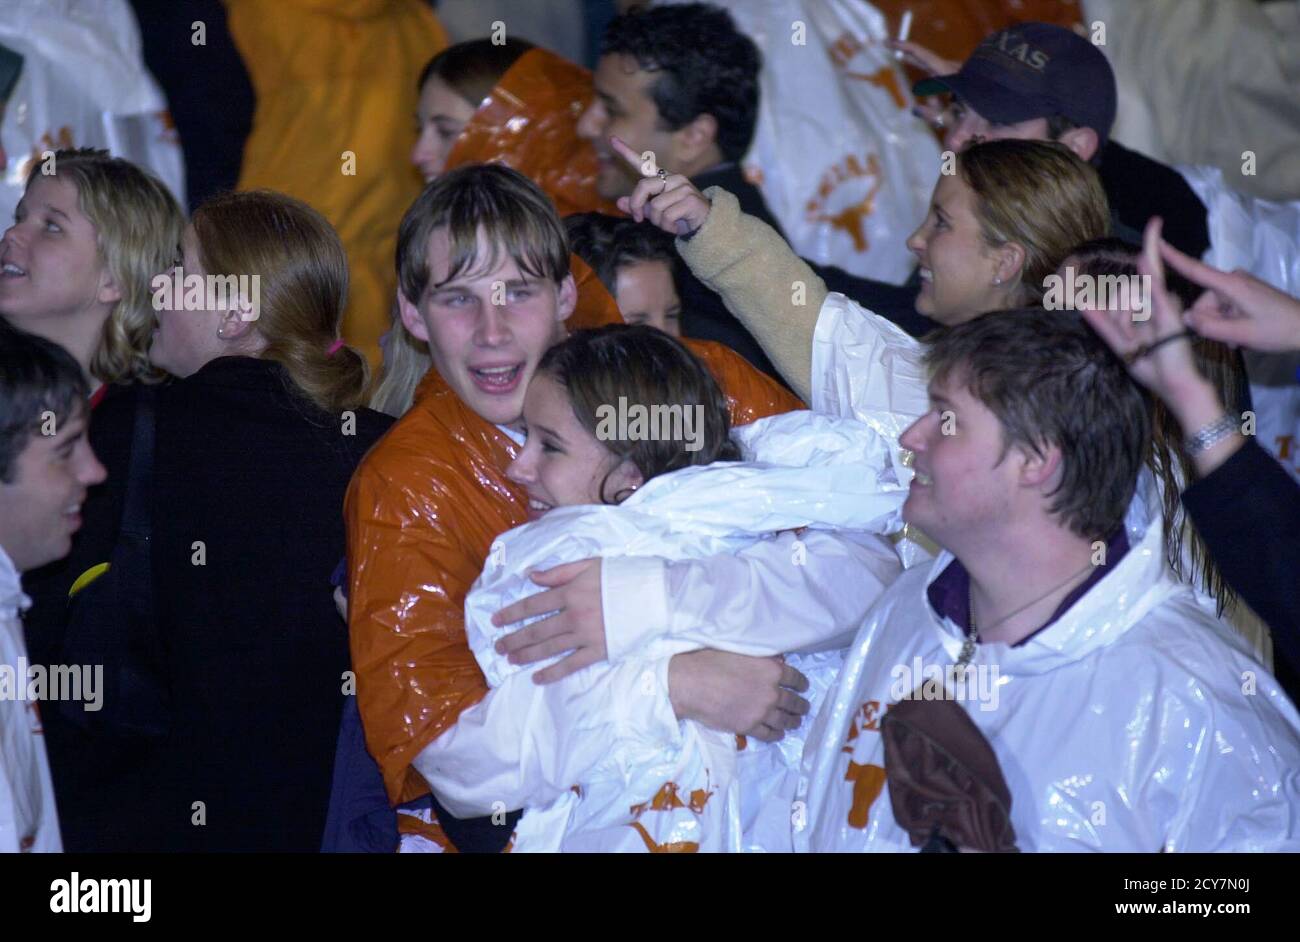 Austin, Texas 08NOV00:  A large crowd gathers in the rain in downtown Austin, Texas at 11th and Congress to celebrate Texas Governor George W. Bush's early lead in the U.S. presidential race. The race was too close to call early Wednesday. ©Bob Daemmrich Stock Photo